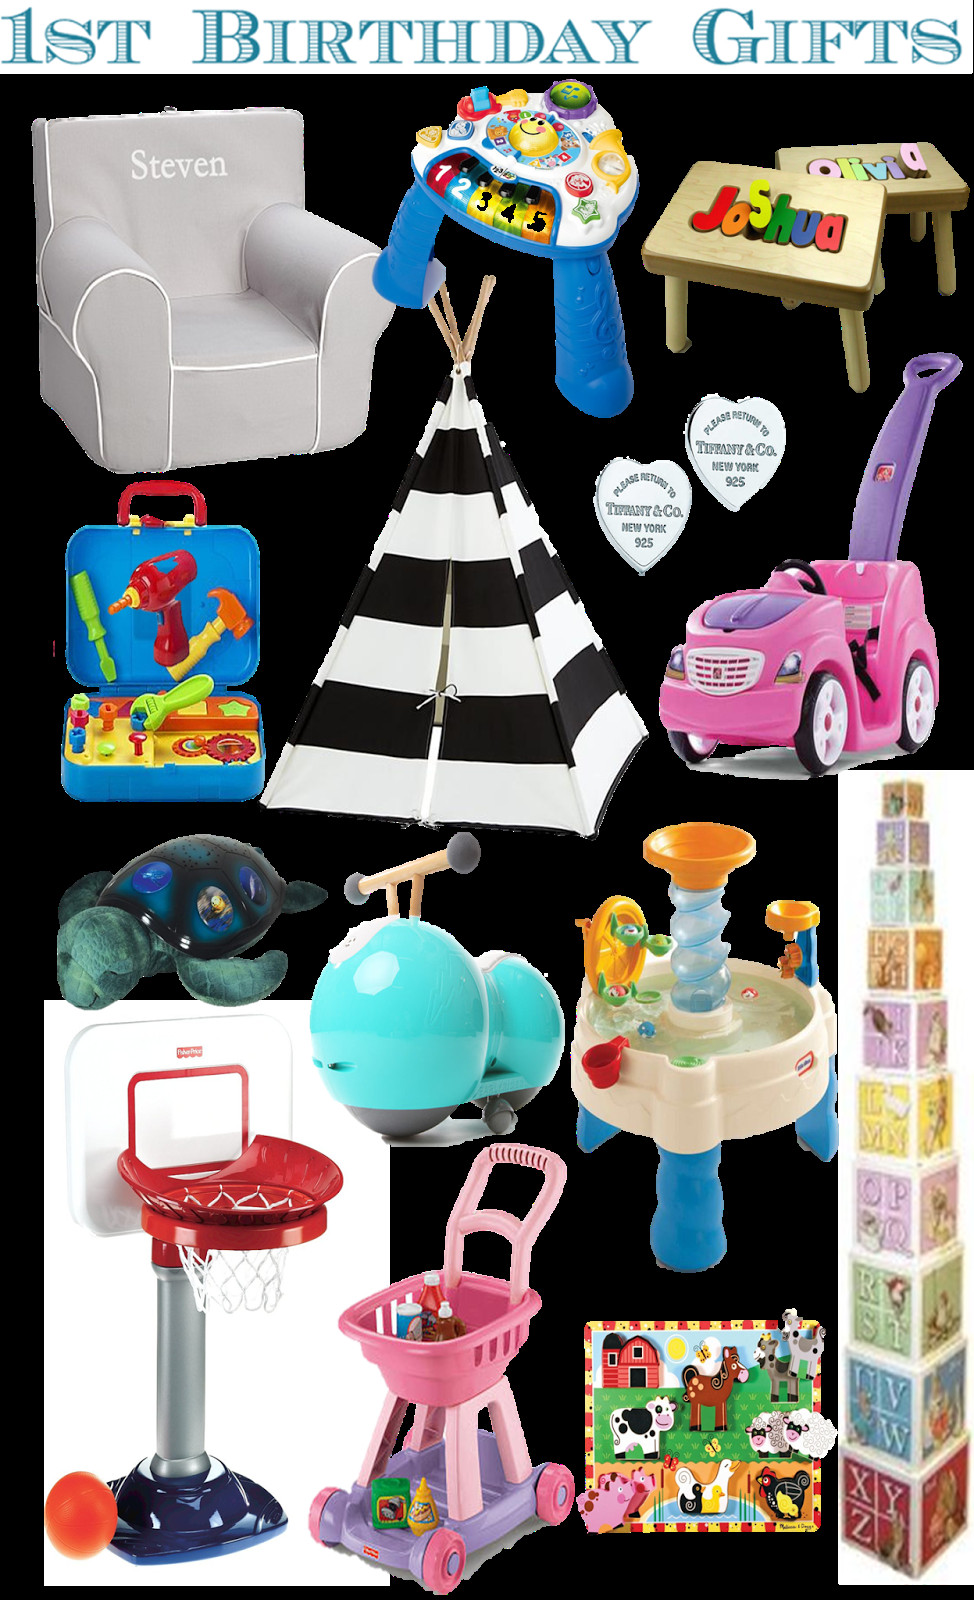 Ideas For Birthday Gifts
 rnlMusings Gift Guide 1st Birthday Gifts